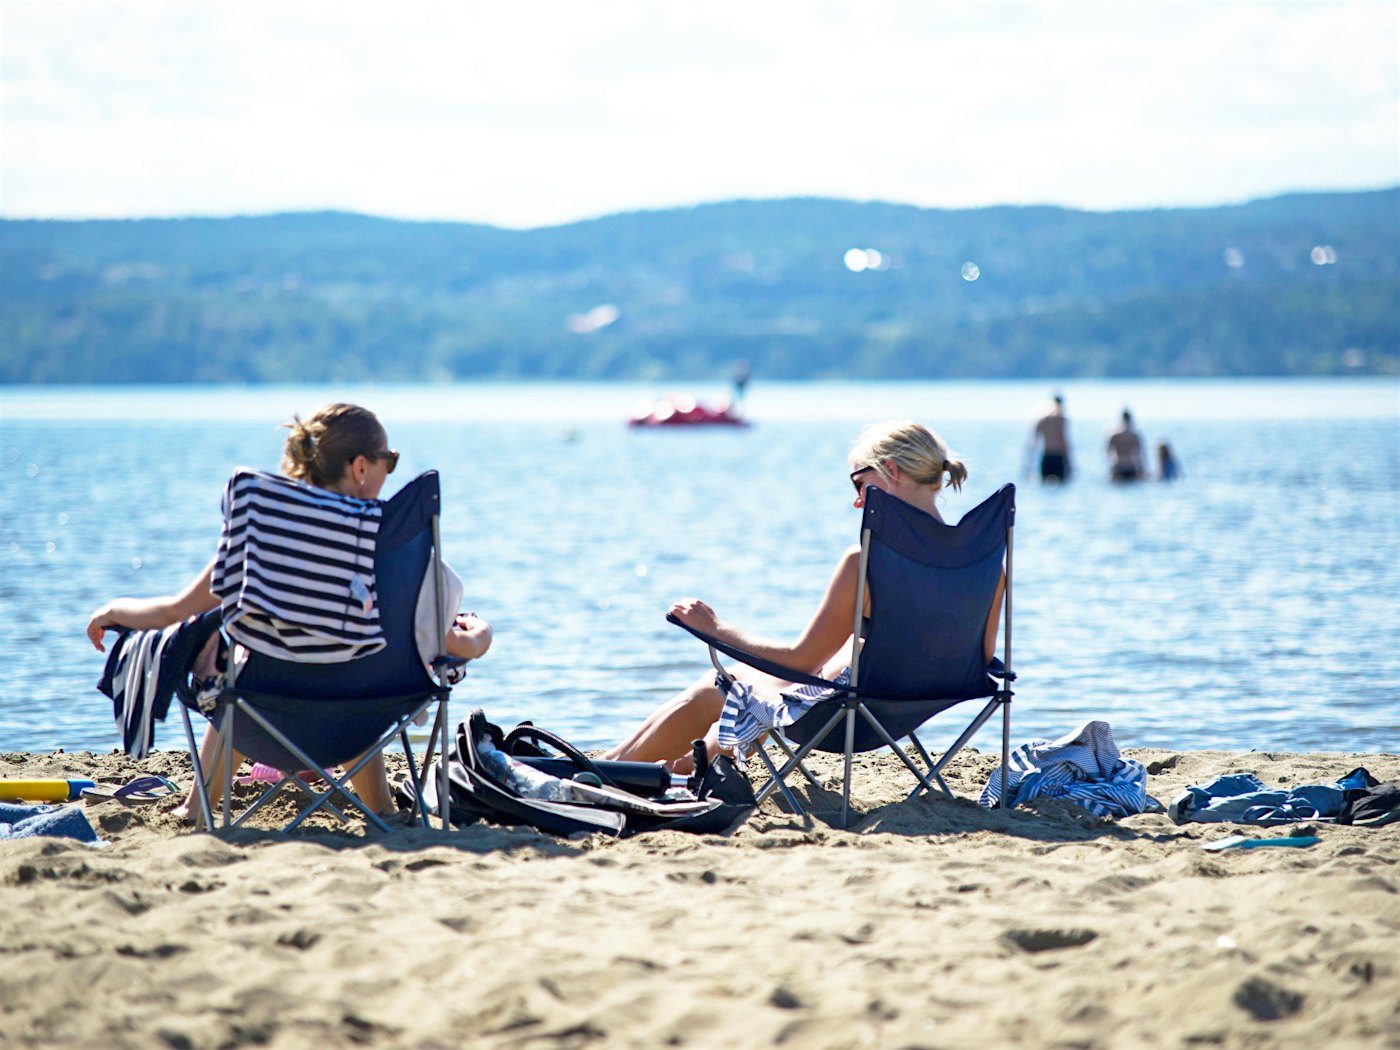 Two ladies sit in beach chairs and look out over the water. Photo